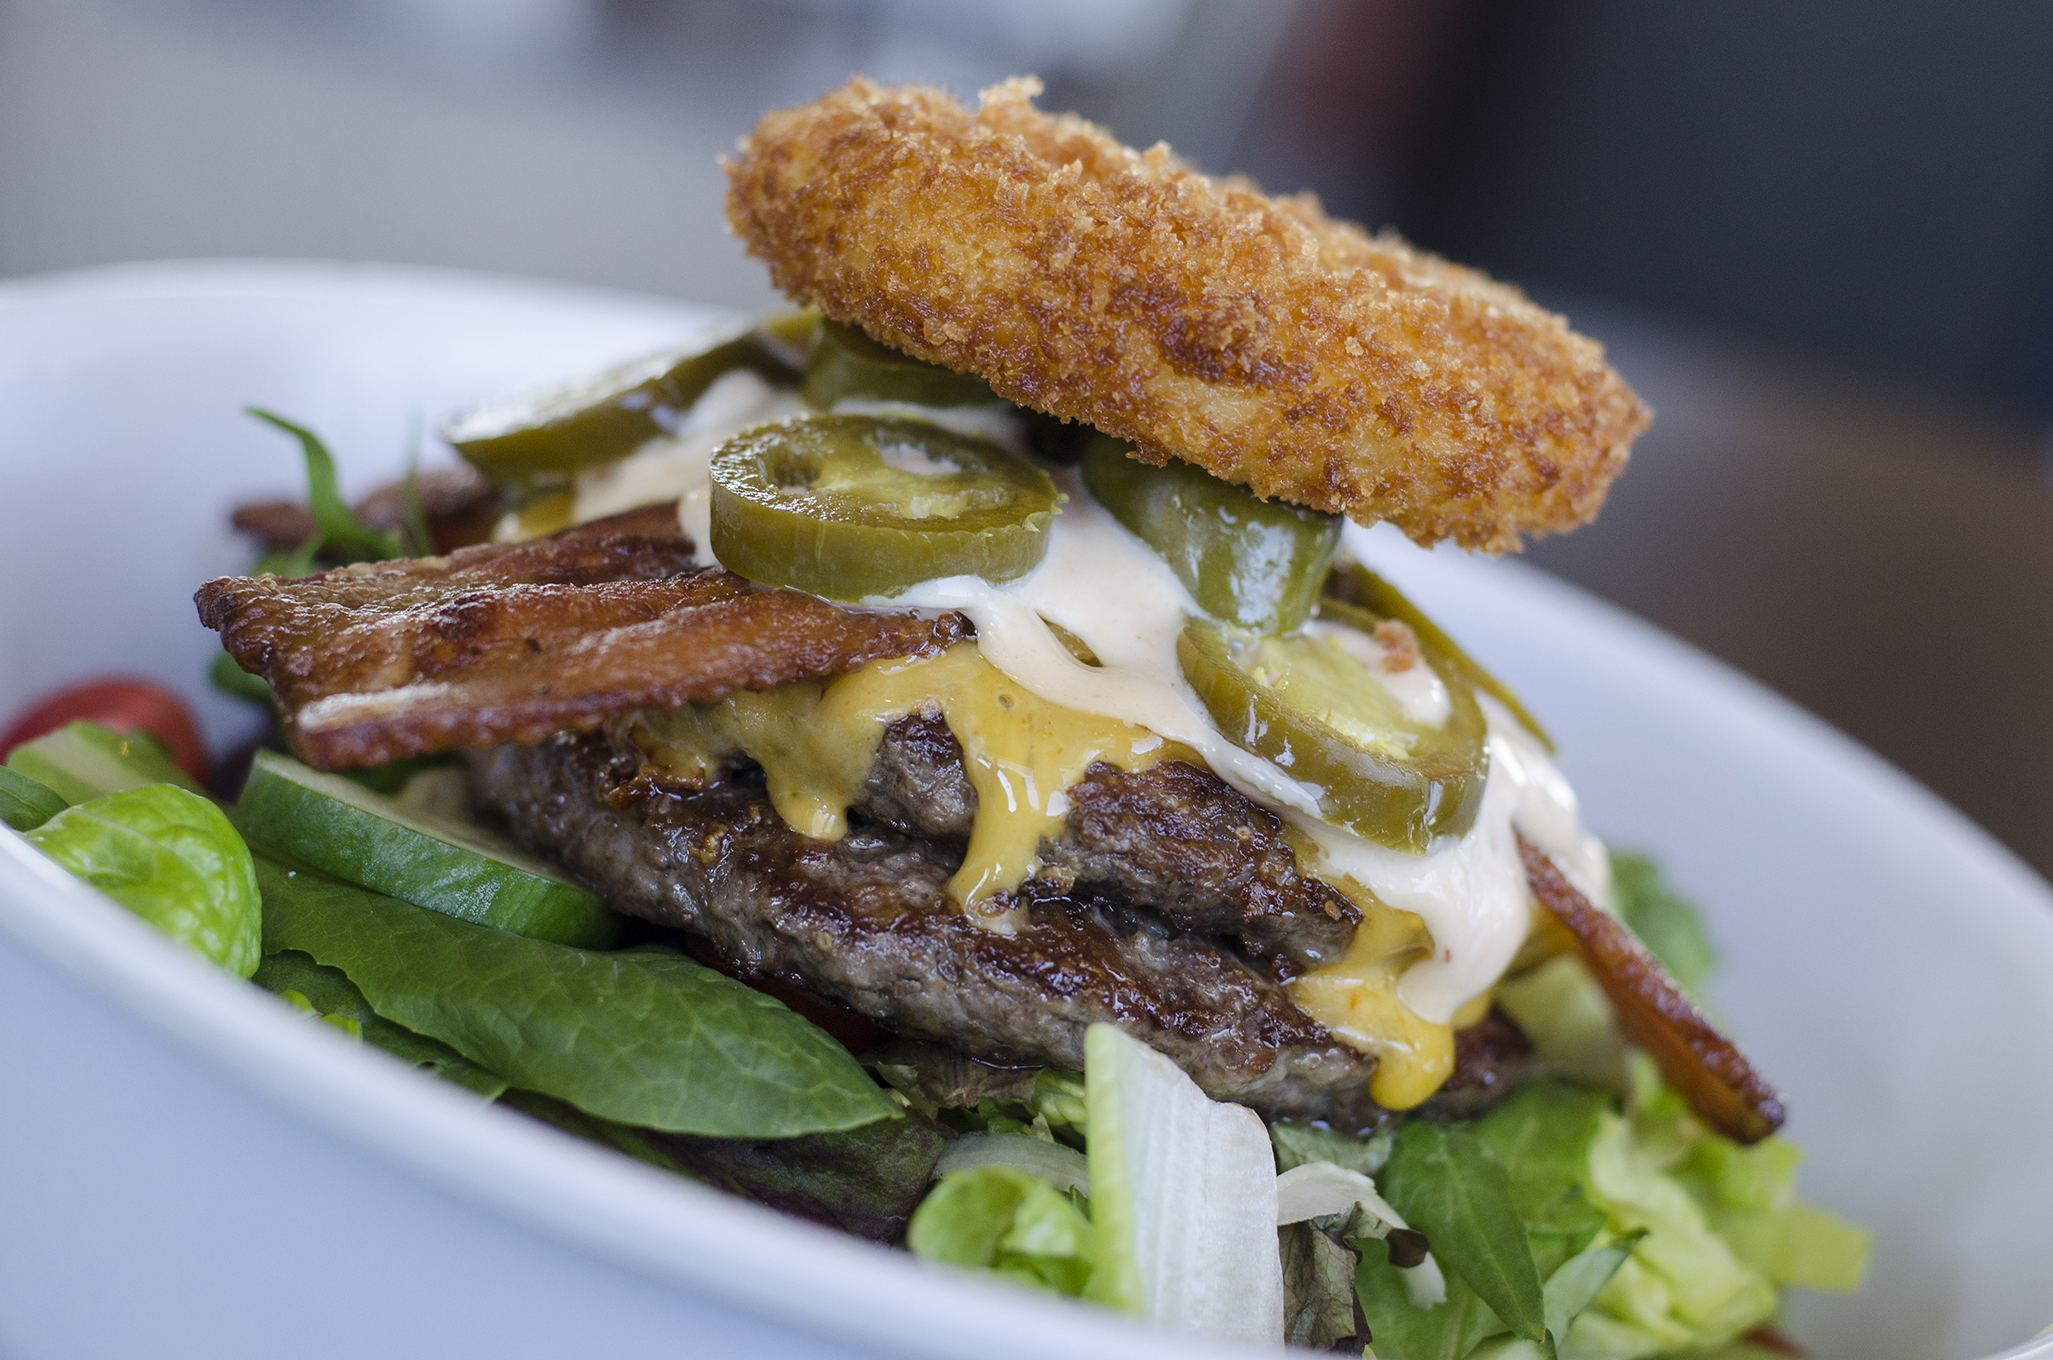 Let's get naked! The Naked Burger Salad from Mamo Burger in Windsor, Ontario.